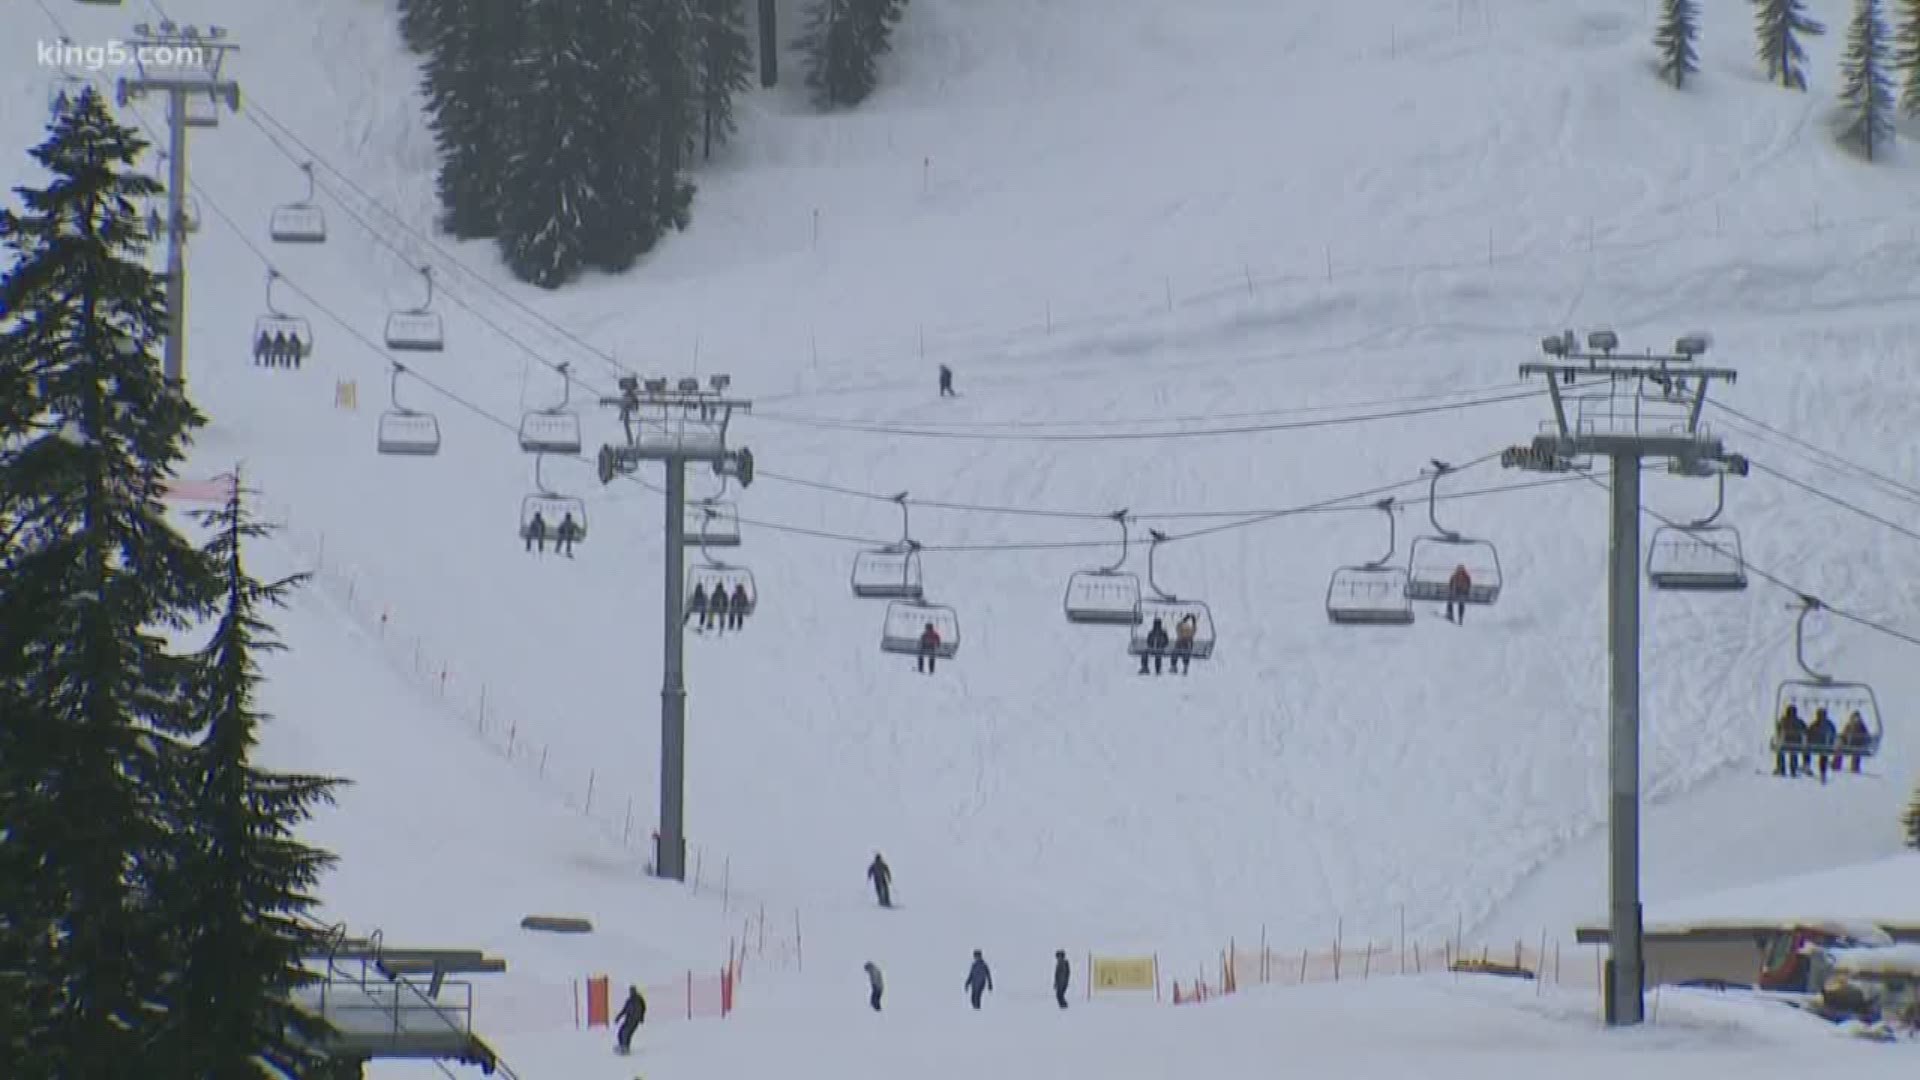 The Northwest Avalanche Center (NWAC) has put the majority of the Cascade mountains under a considerable avalanche risk. Stevens Pass closed all but two lifts.